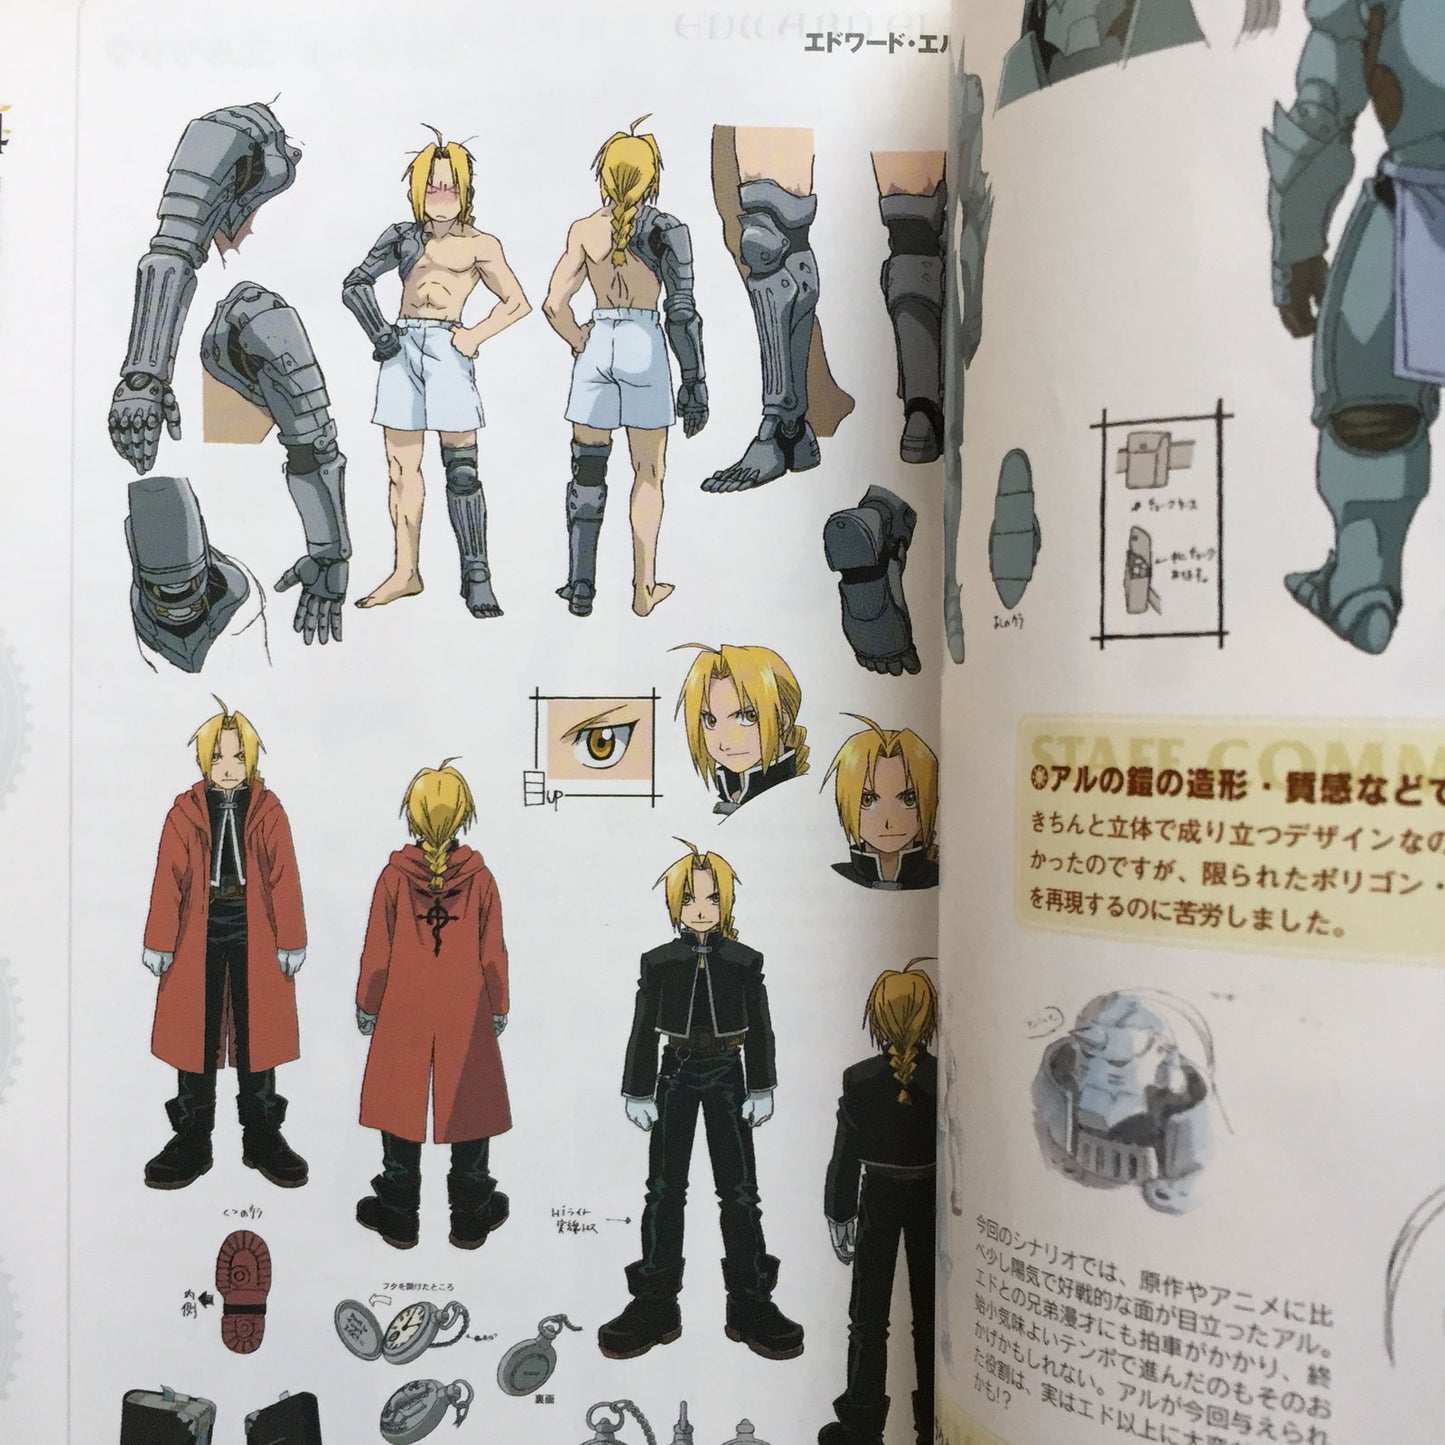 Fullmetal Alchemist and the Broken Angel Official Complete Guide